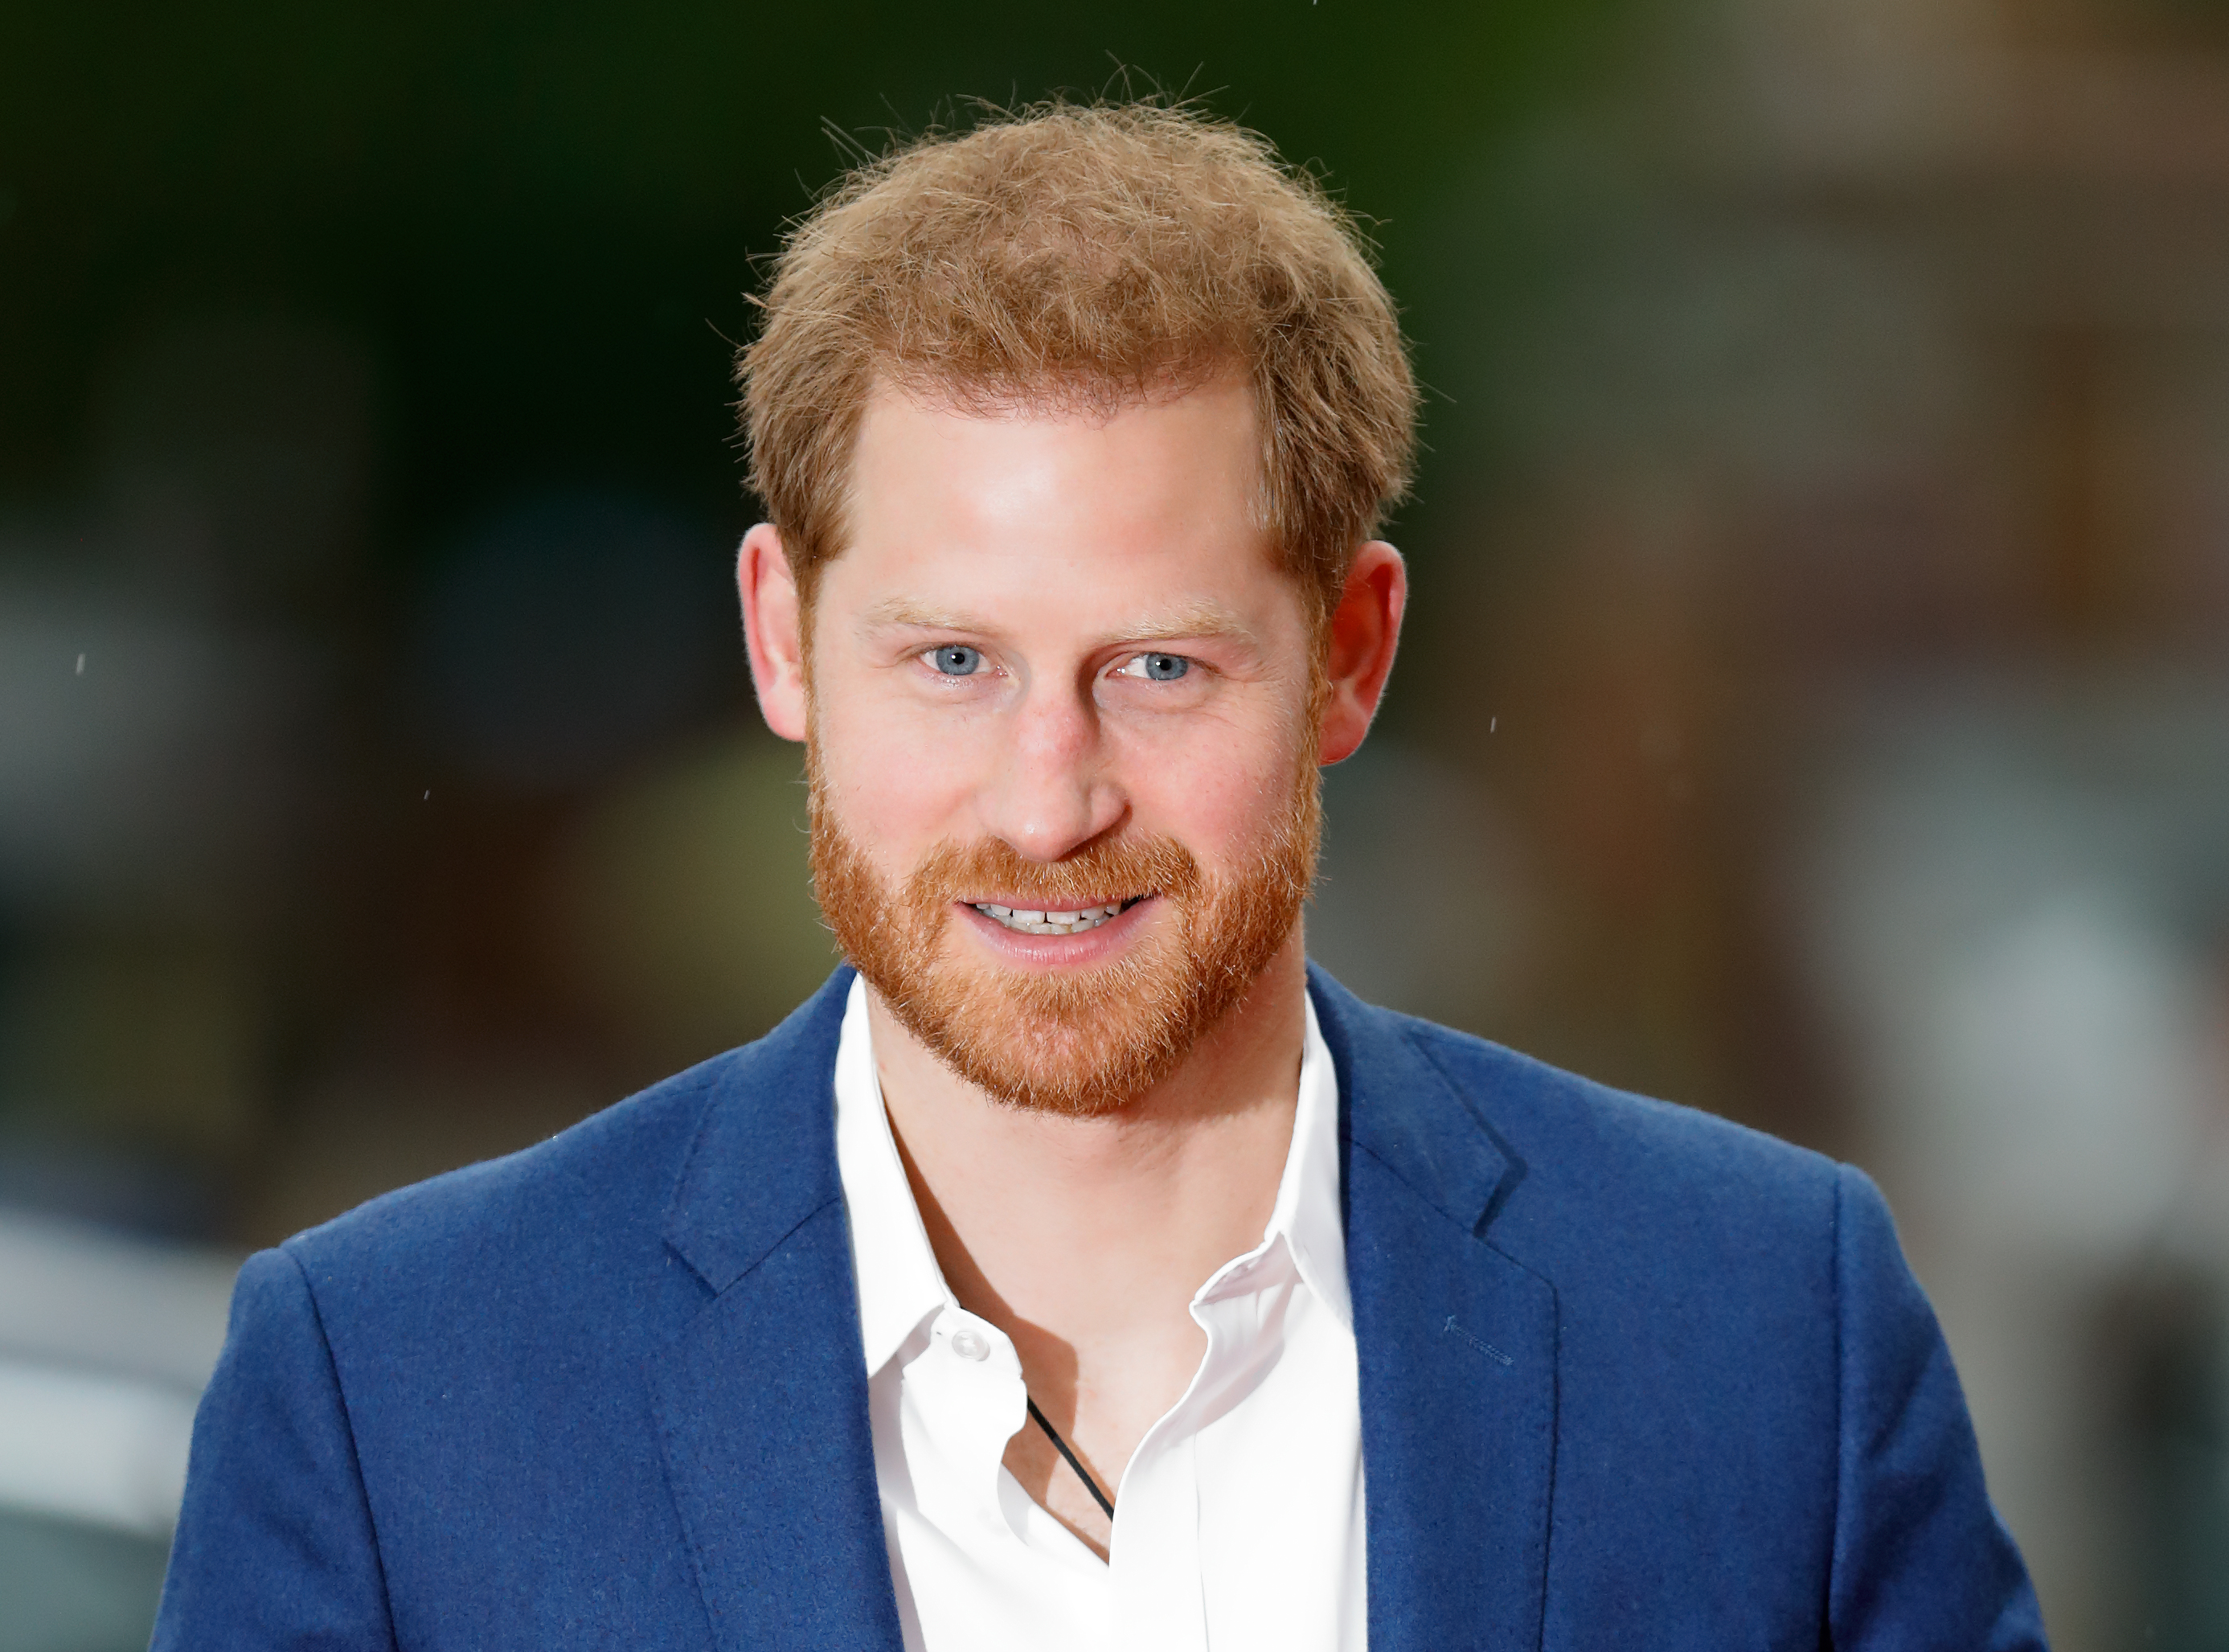 Prince Harry attends the Sentebale Audi Concert at Hampton Court Palace on June 11, 2019 in London, England. | Source: Getty Images